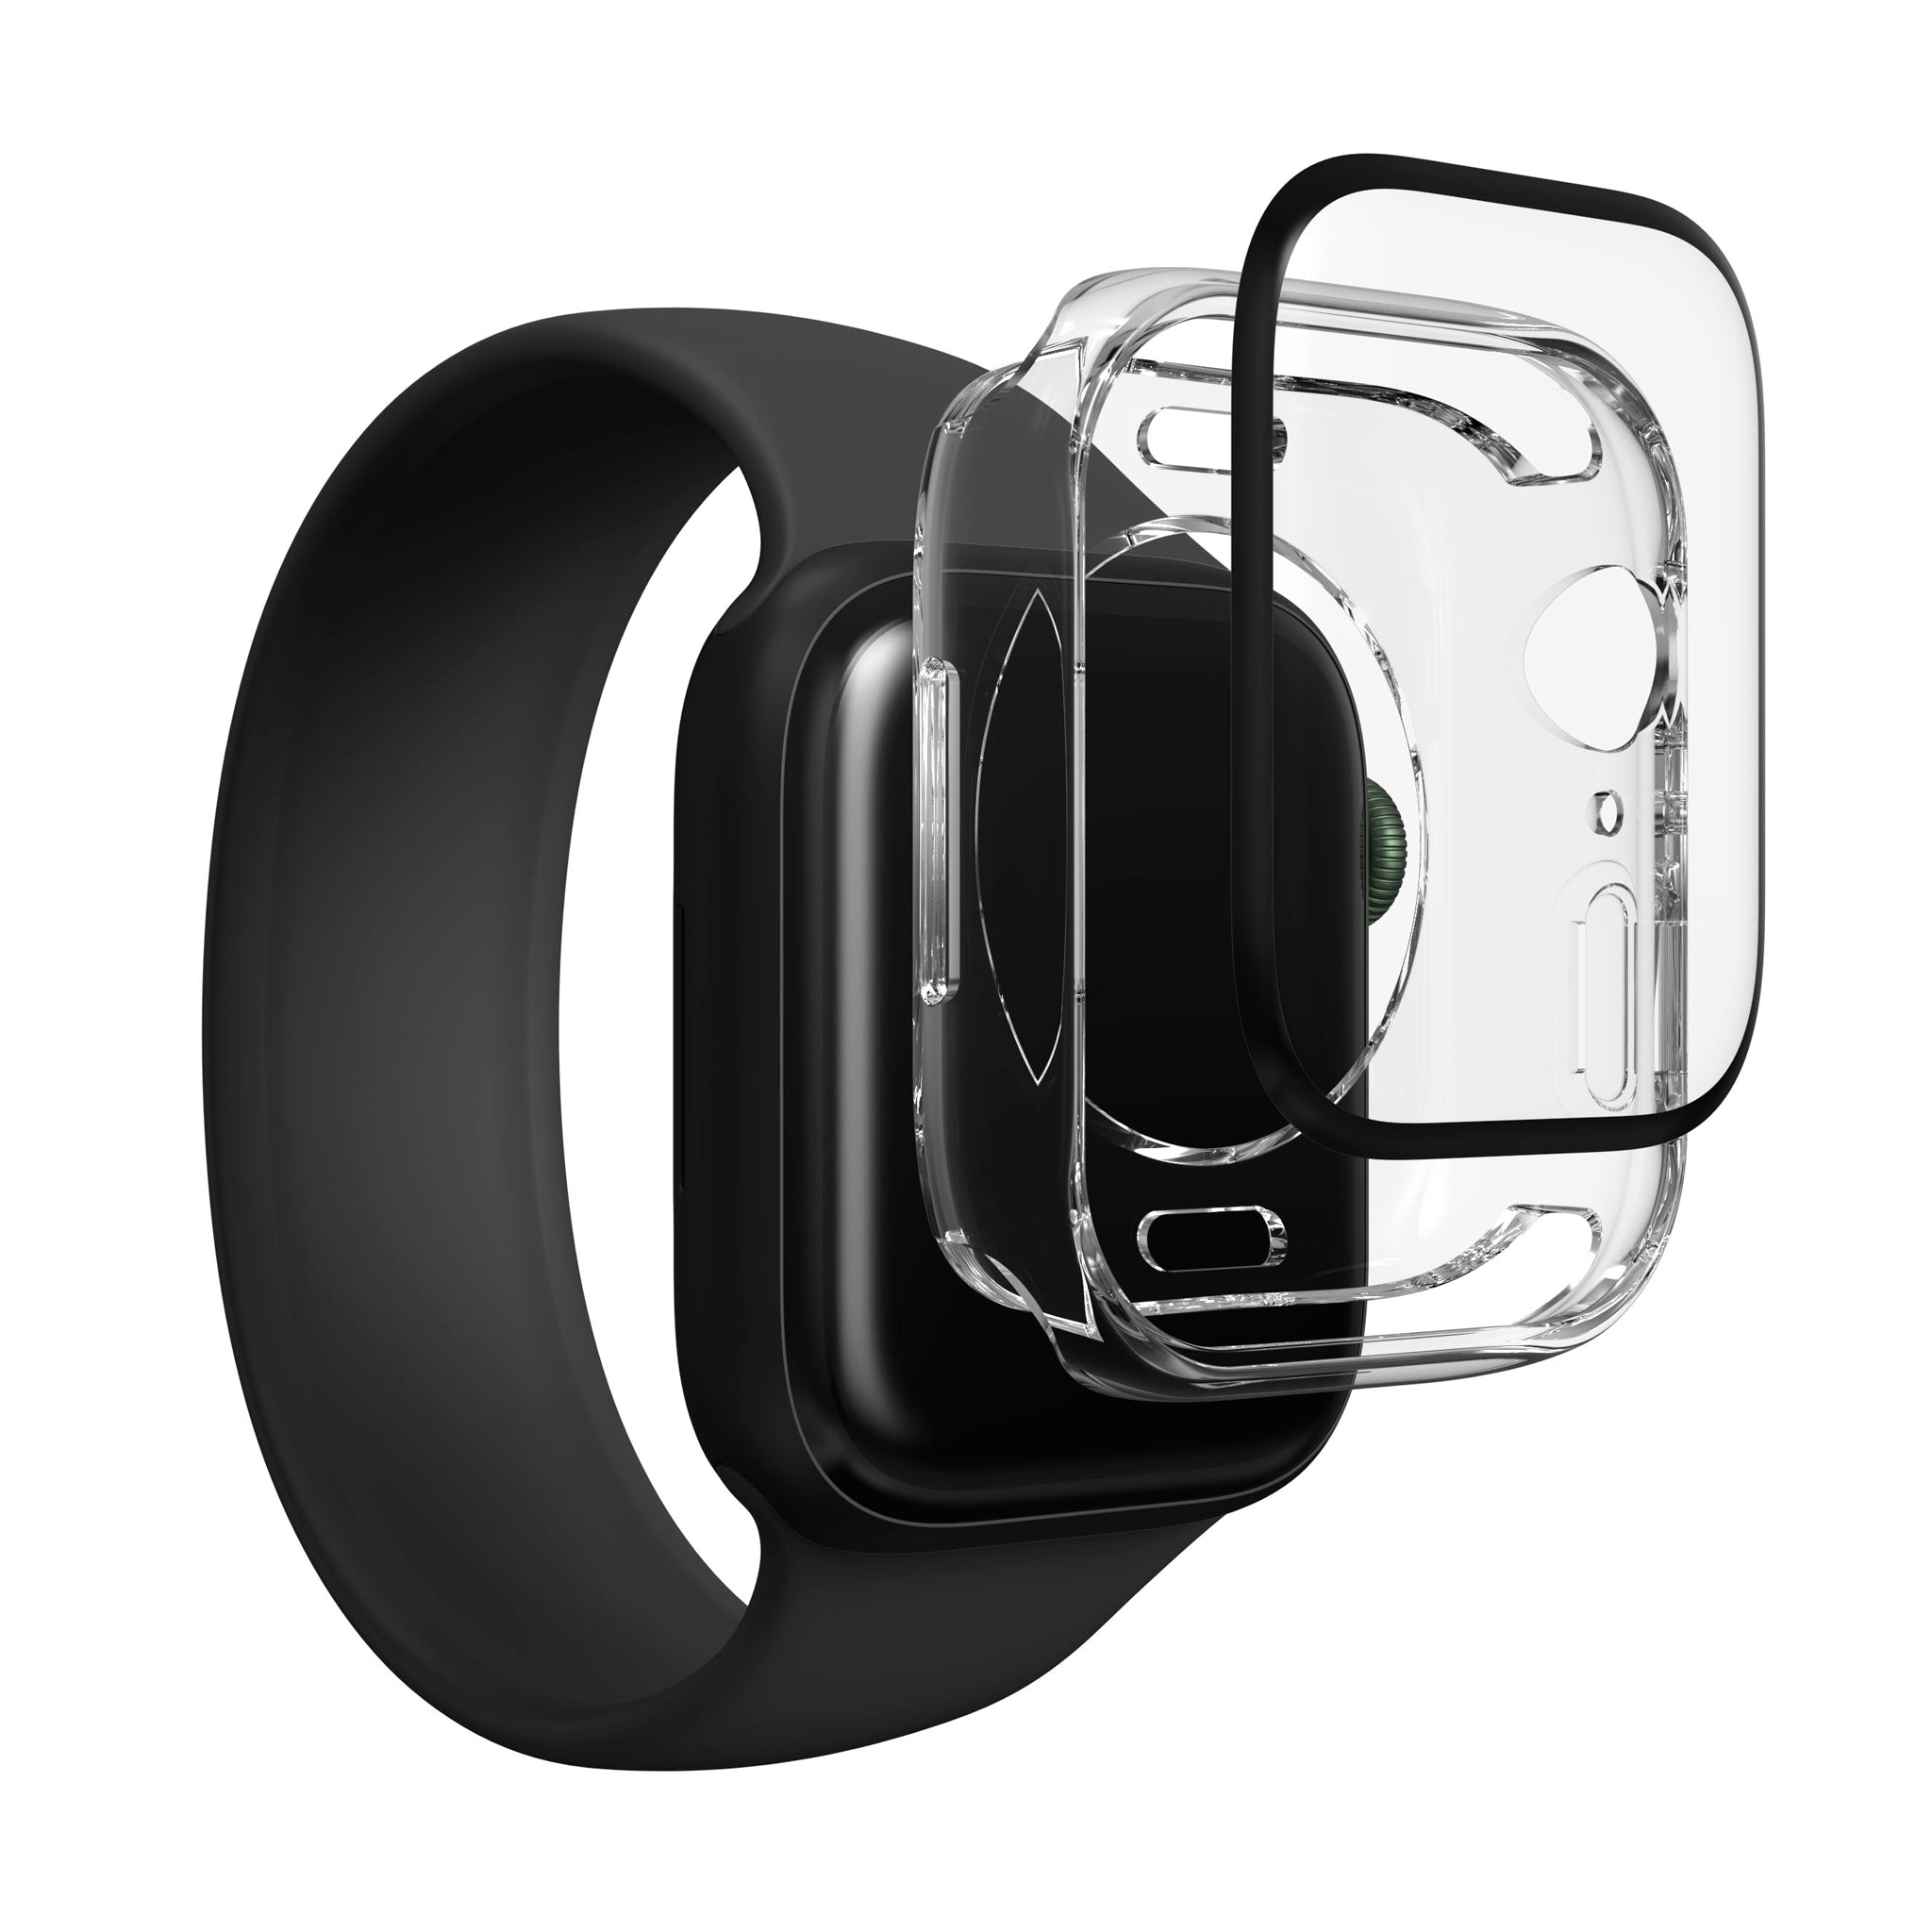 Zagg - Invisibleshield Glassfusion 360 Plus Screen Protector For Apple Watch 41mm - Clear